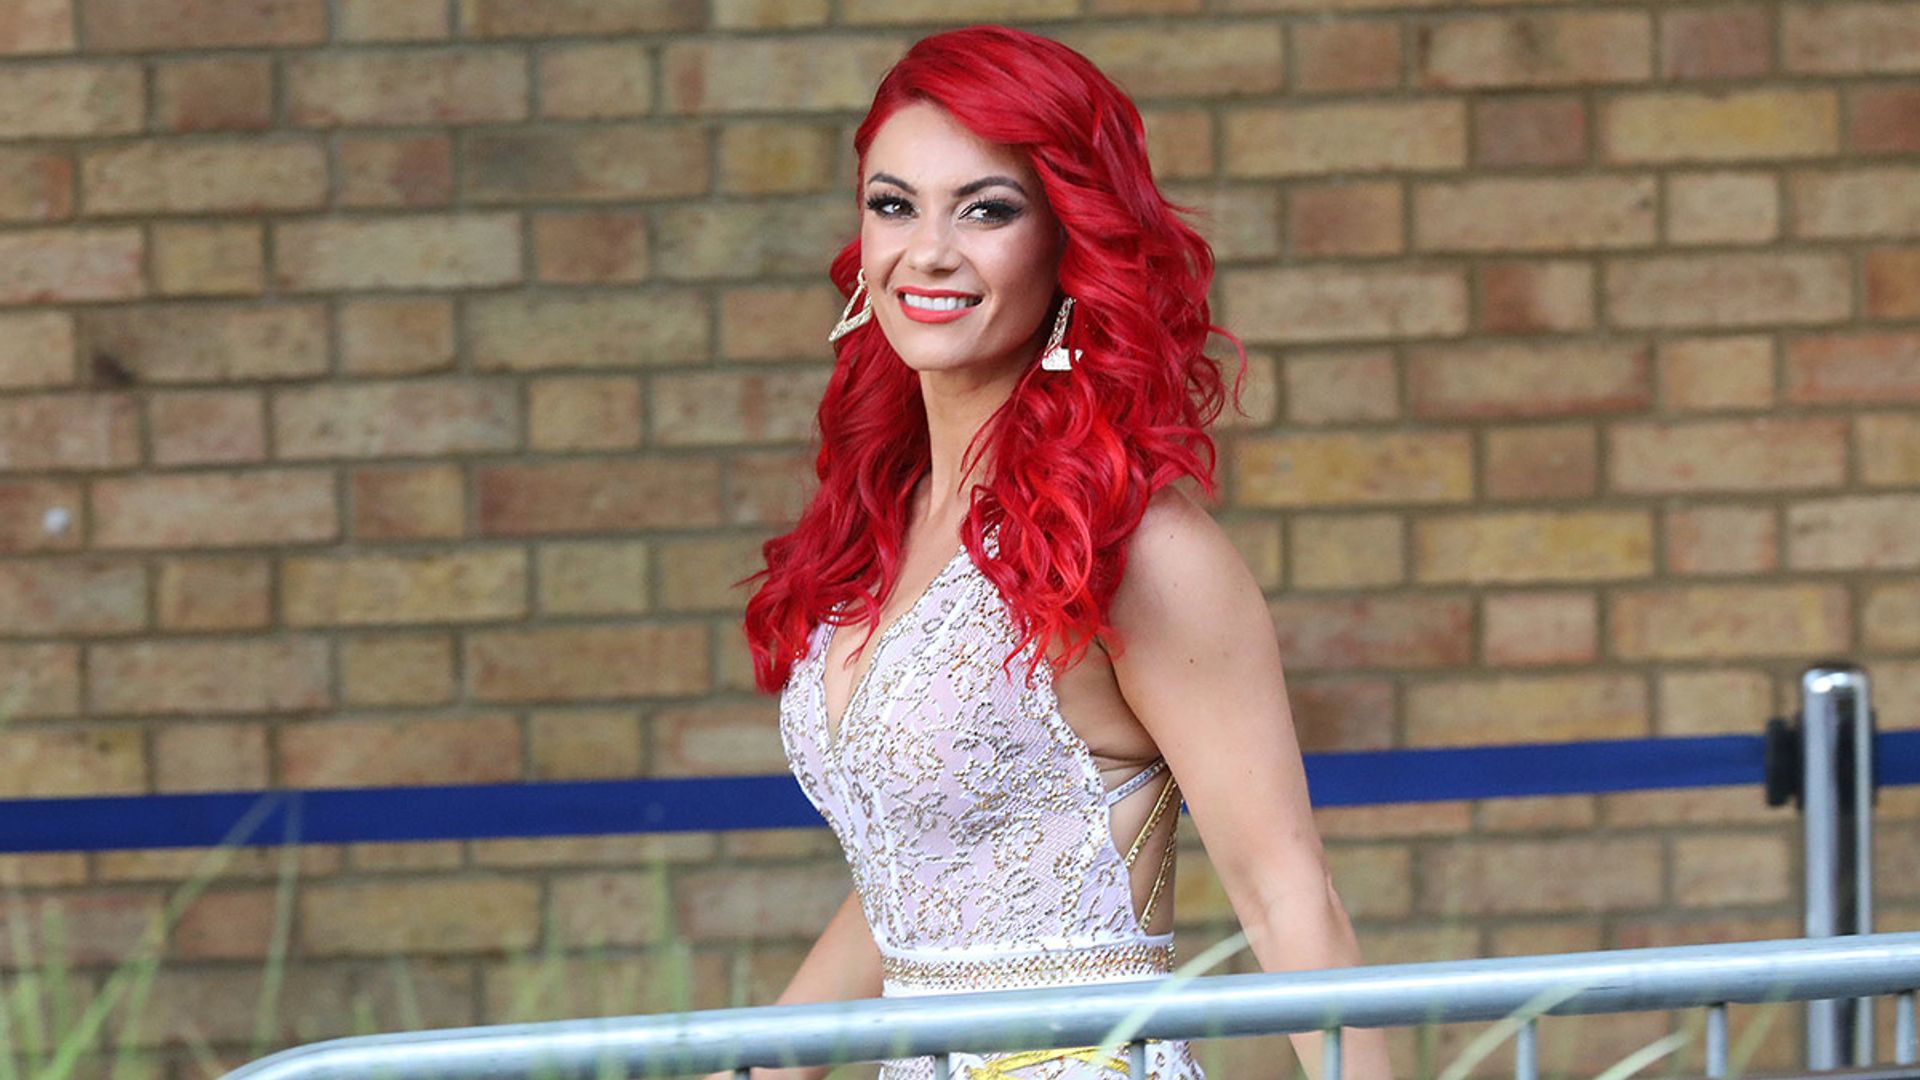 You won't believe what Strictly star Dianne Buswell got Giovanni Pernice for Christmas